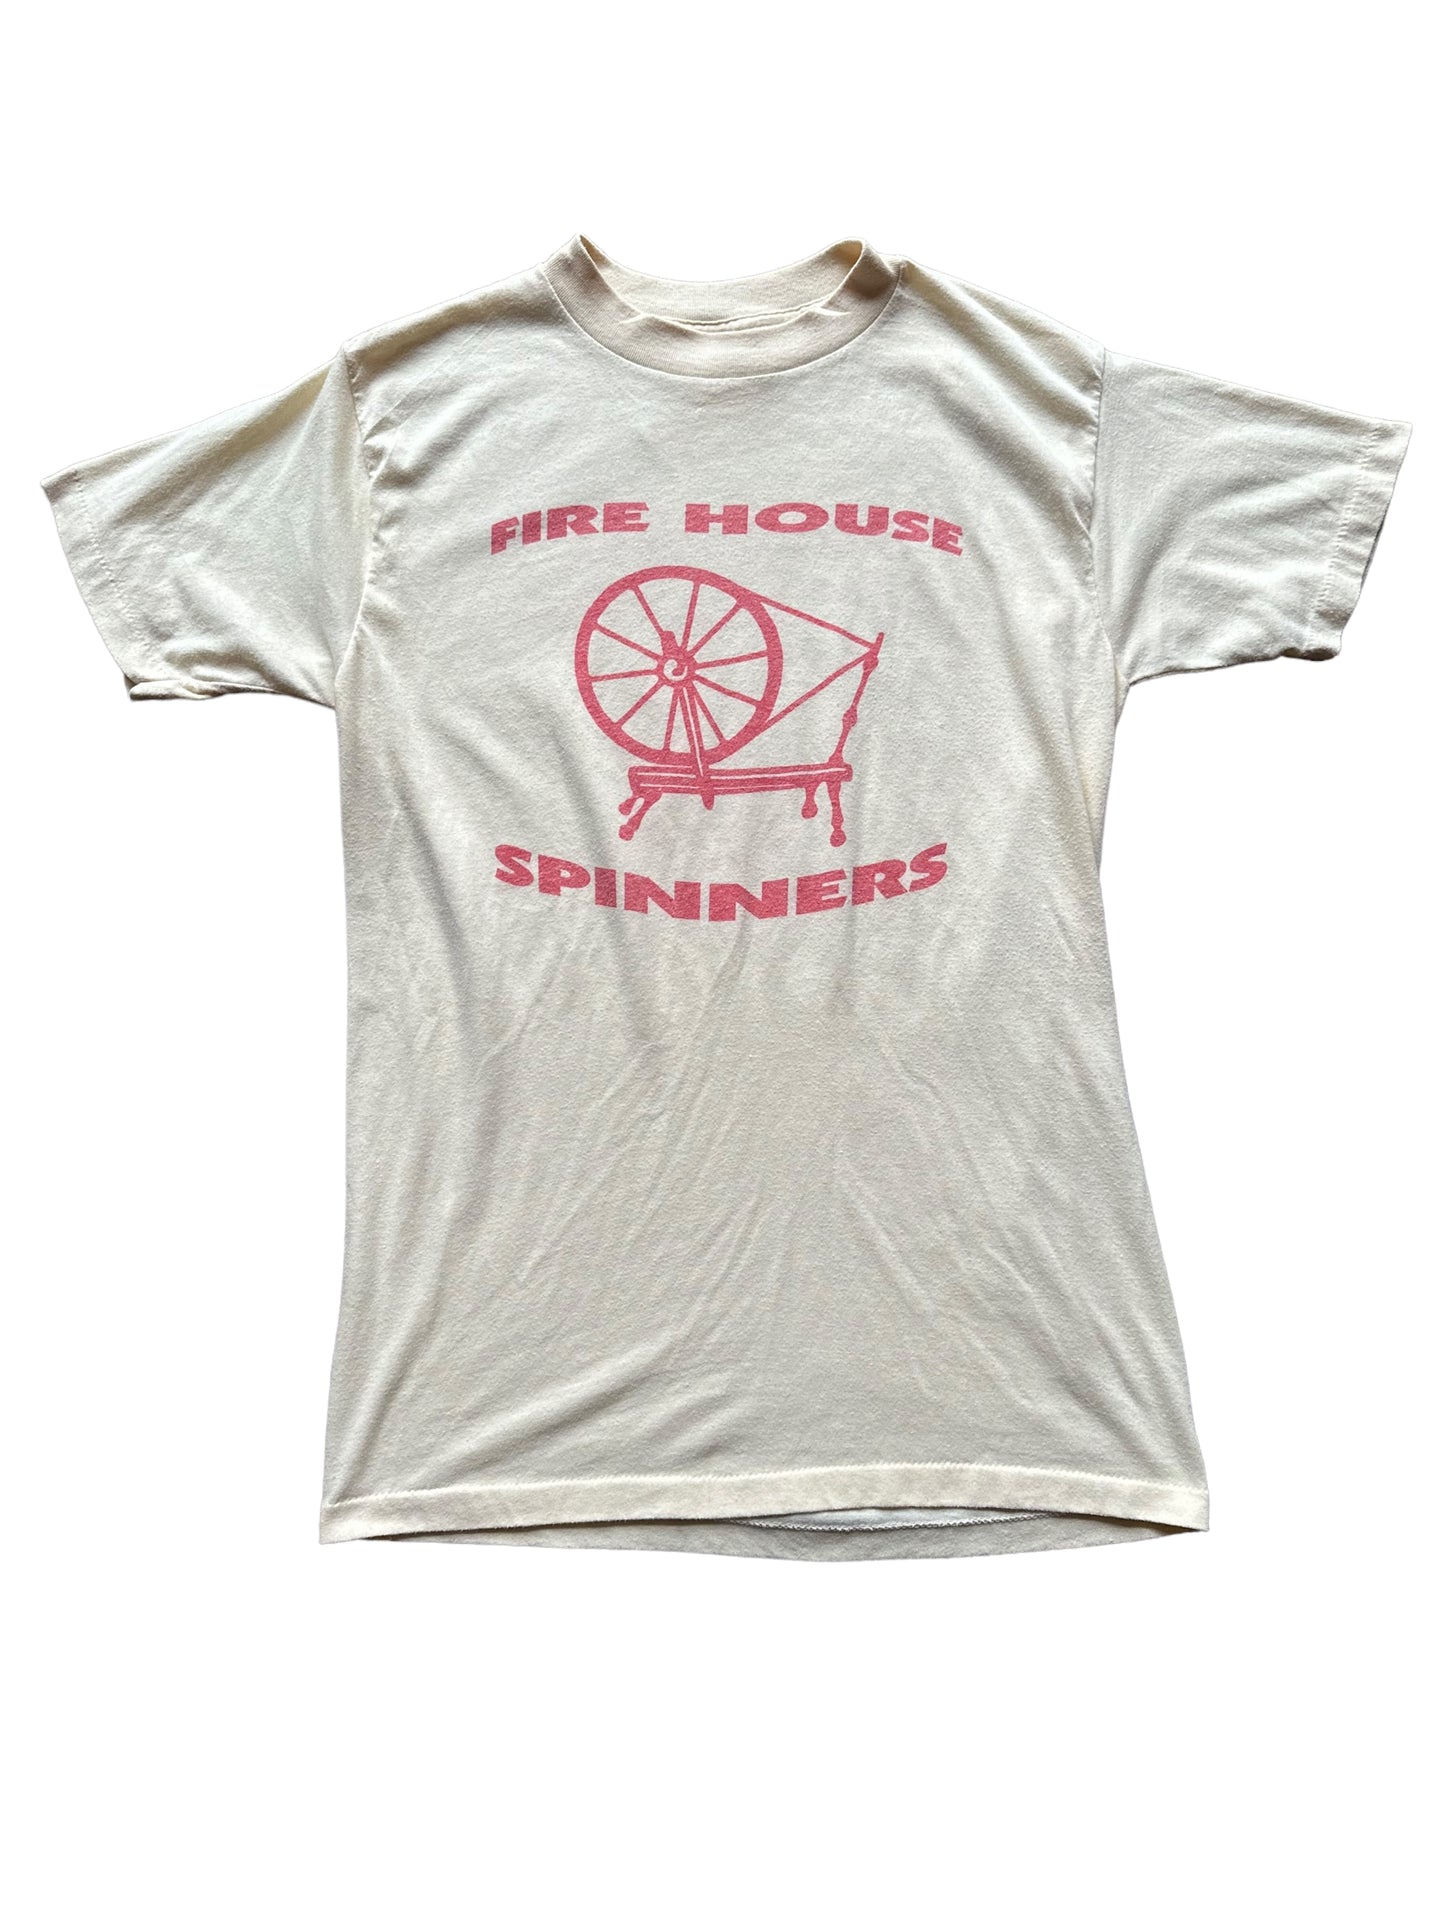 Front View Vintage Fire House Spinners Tee Size Large|  Vintage T Shirt Seattle | Barn Owl Vintage Tee